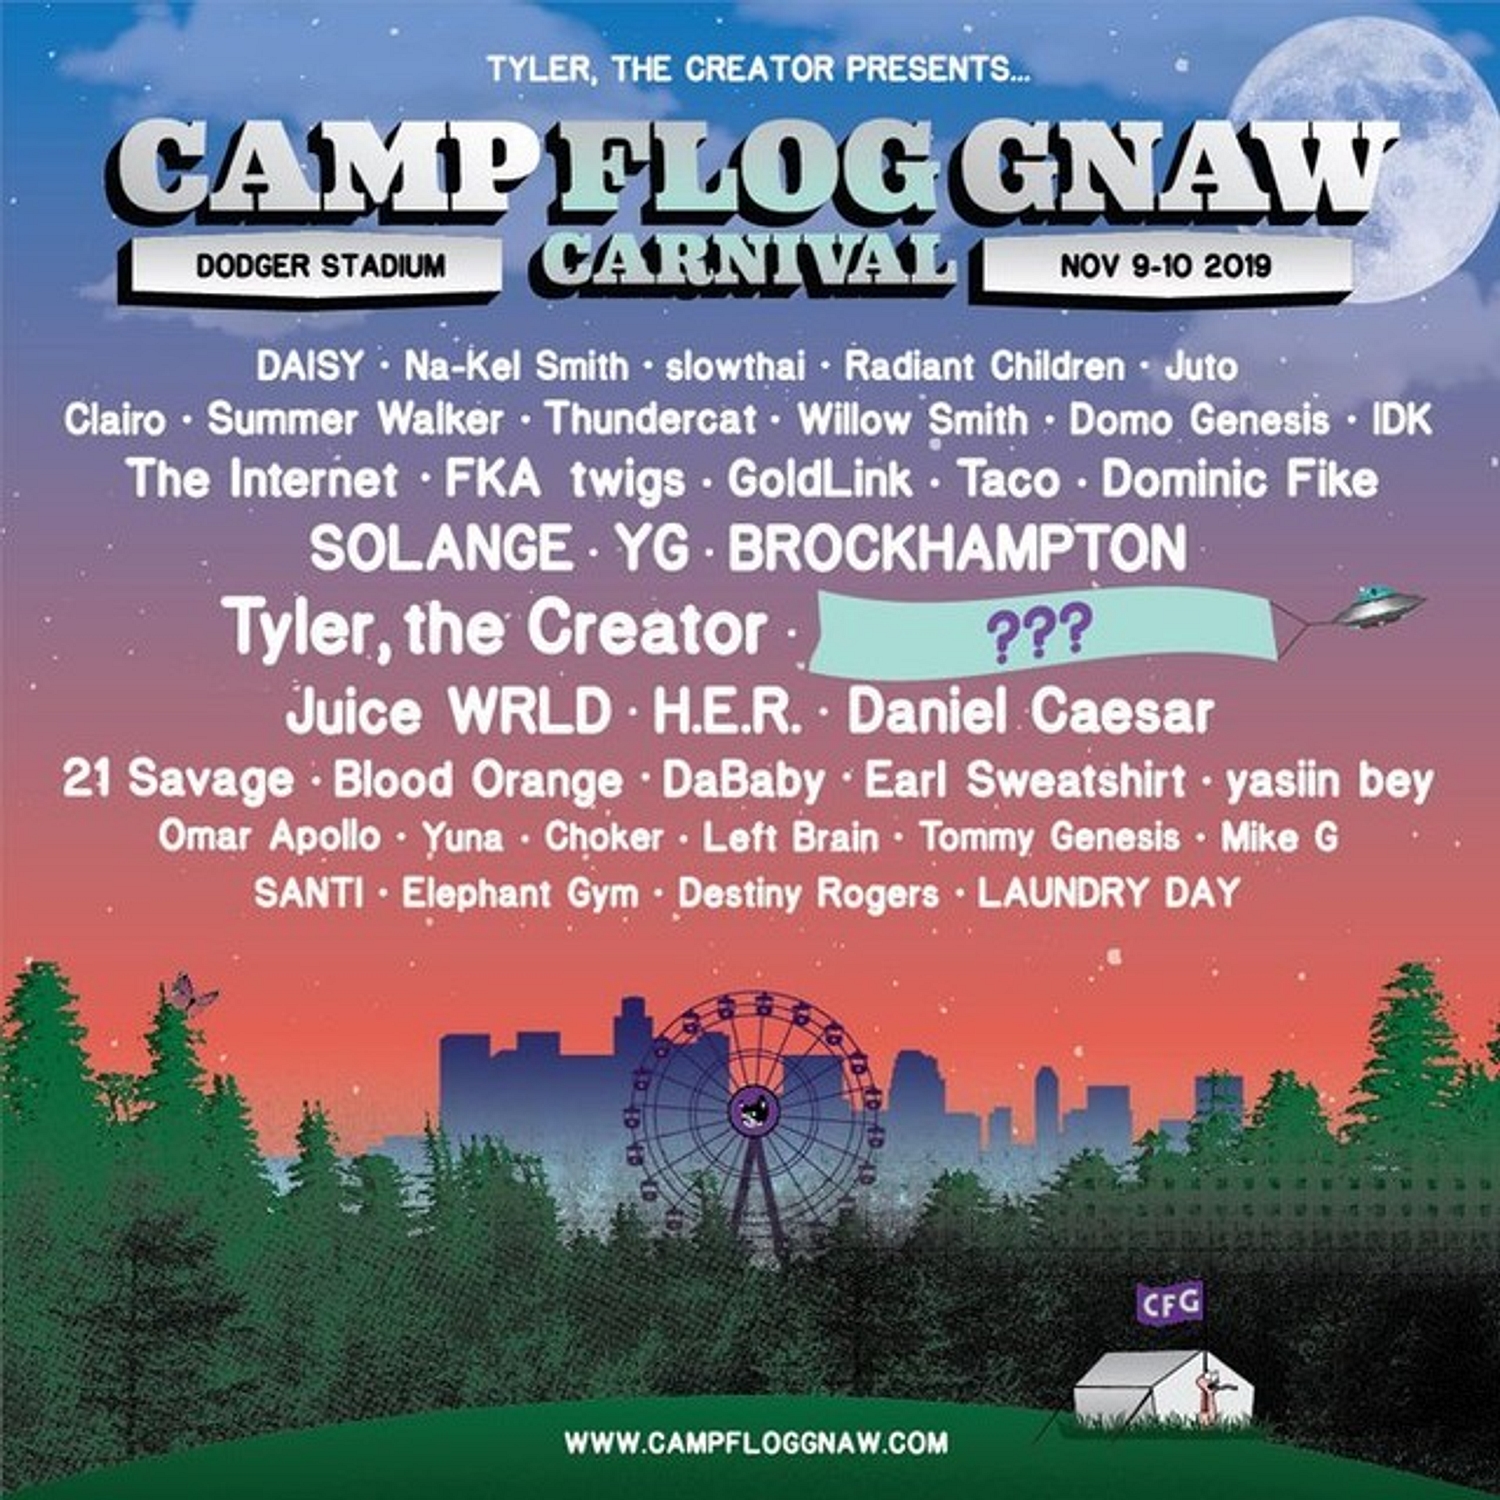 Tyler, The Creator unveils Camp Flog Gnaw 2019 line-up